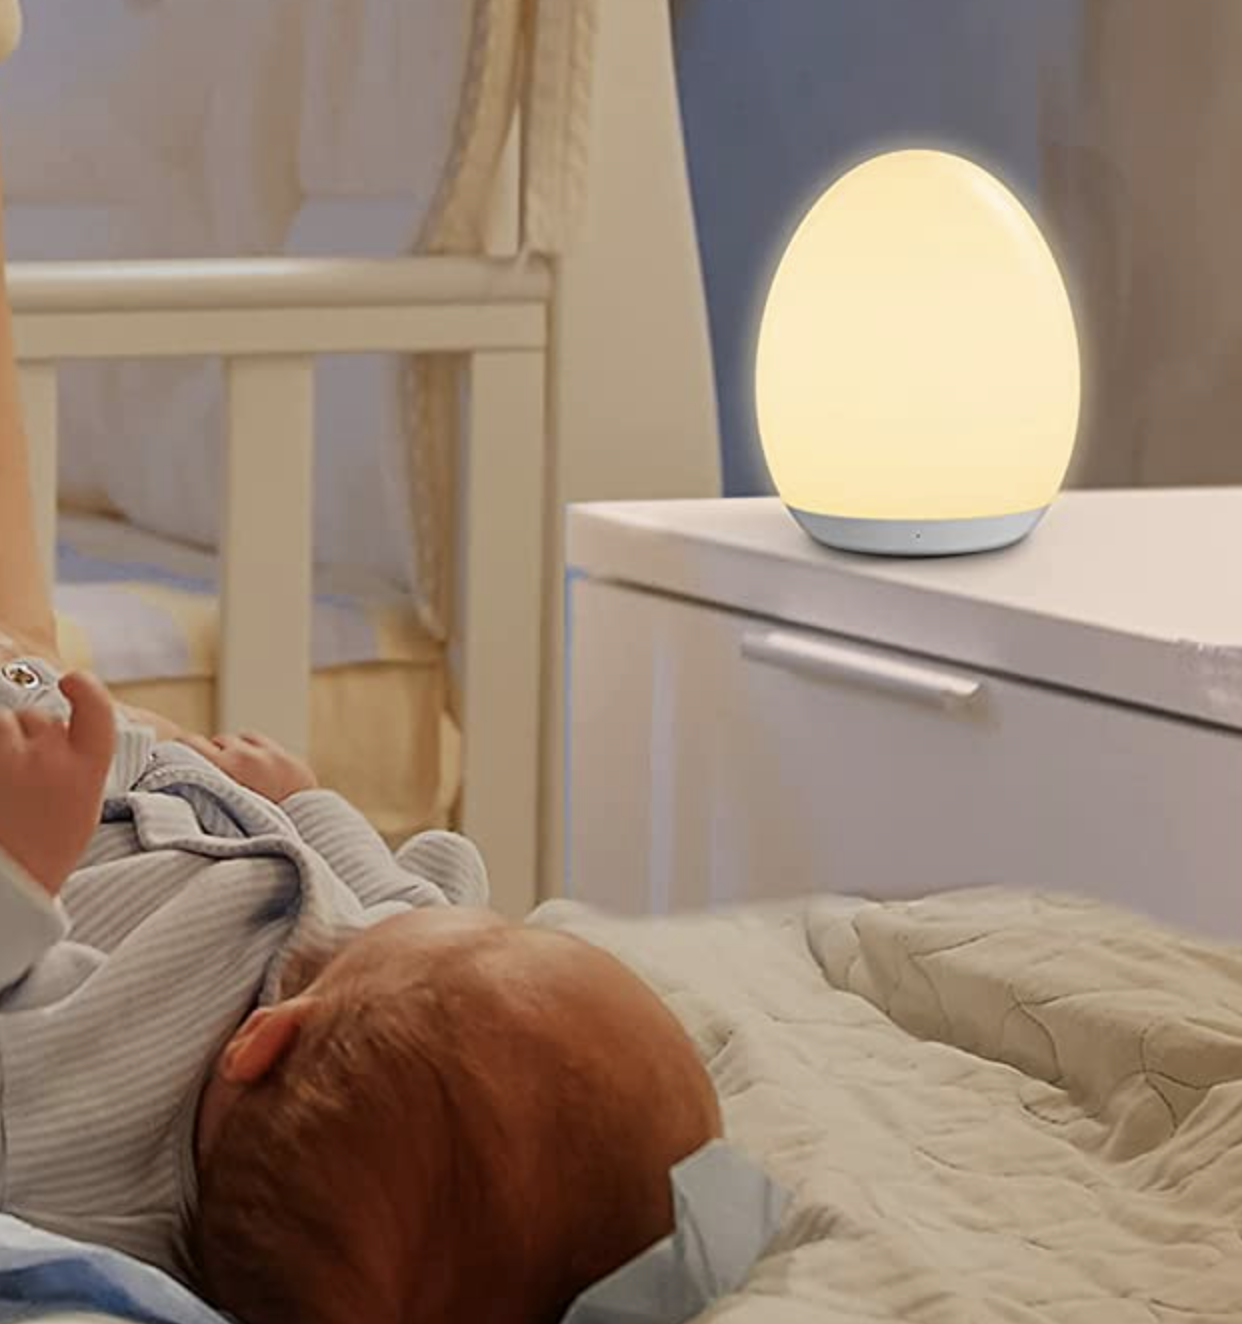 A baby sleeping next to the lamp